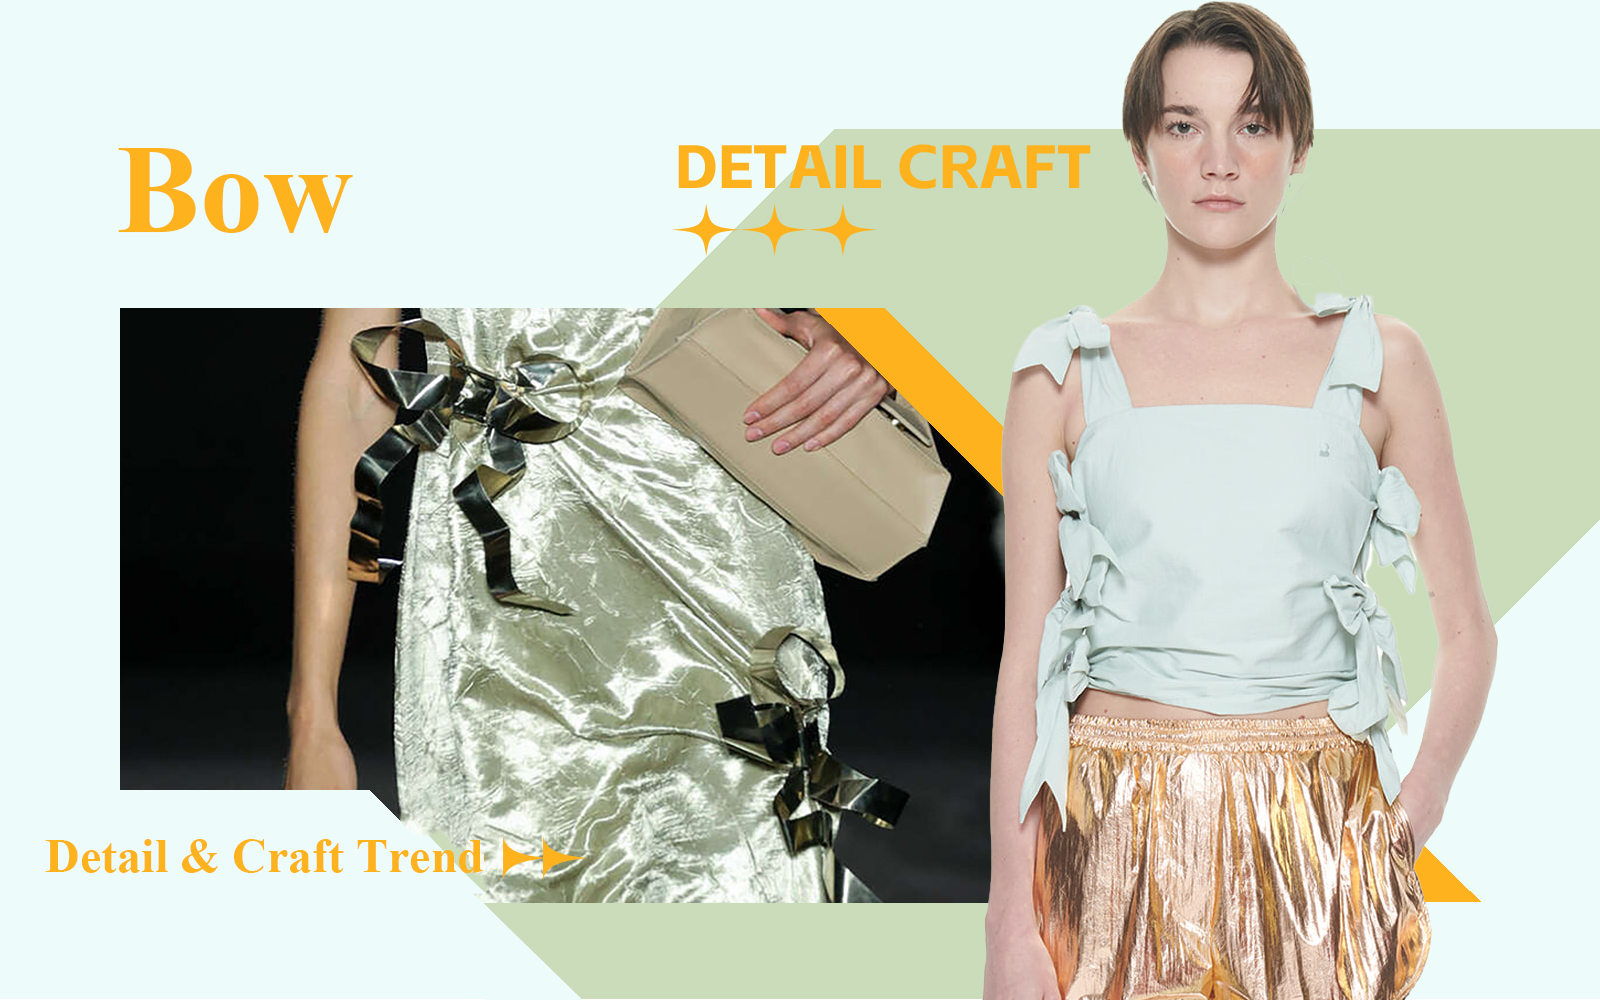 Bowcore -- The Detail & Craft Trend for Womenswear